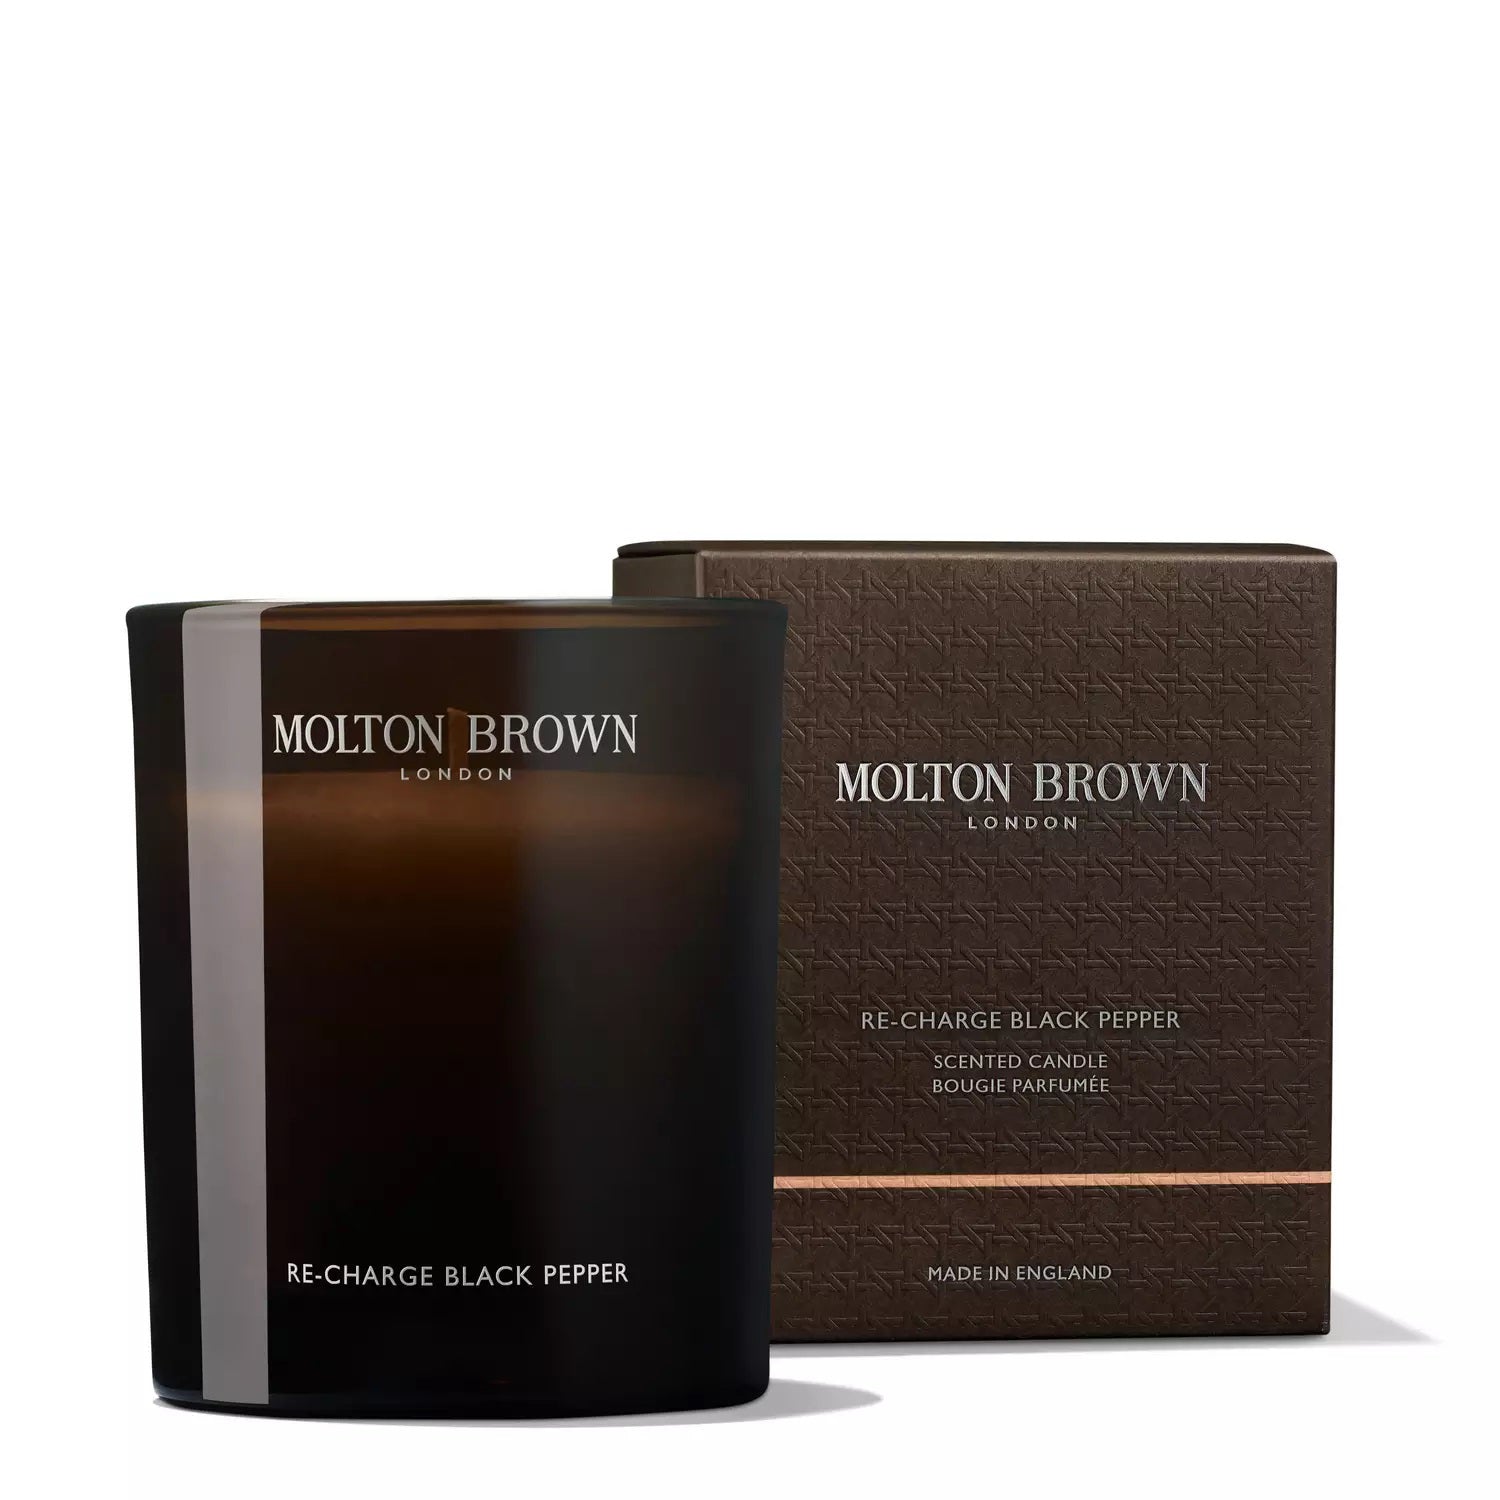 MOLTON BROWN - RE-CHARGE BLACK PEPPER CANDLE